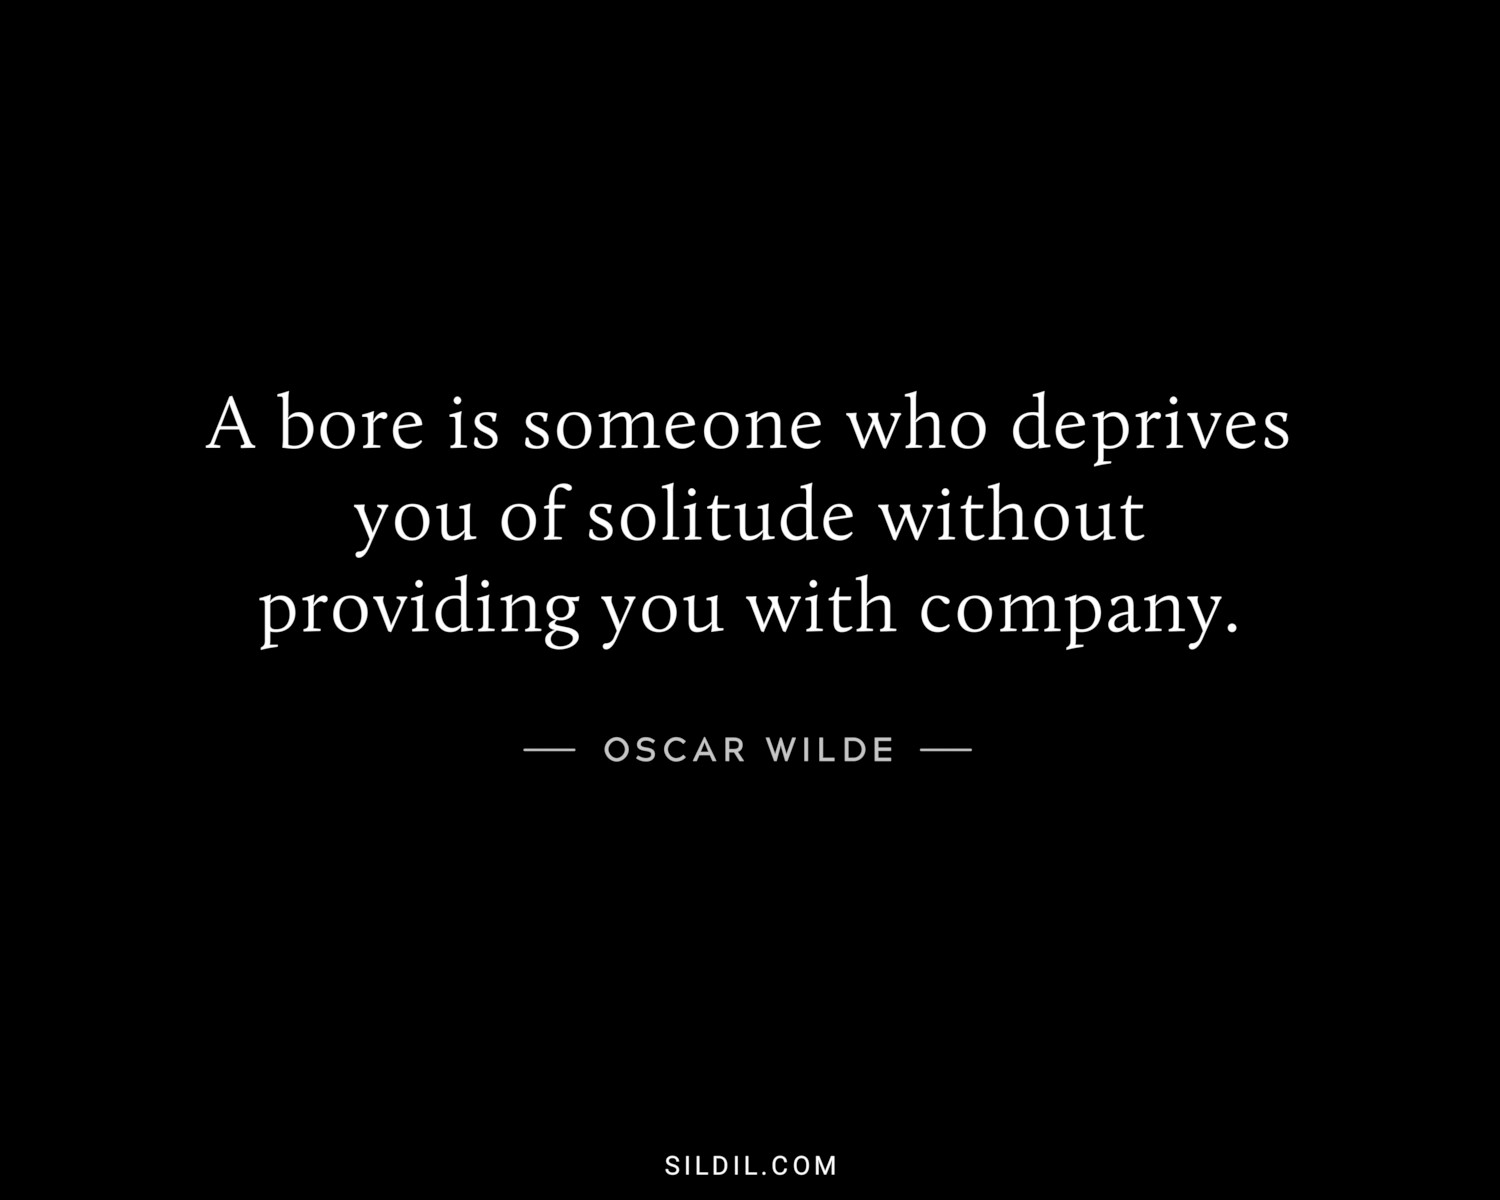 A bore is someone who deprives you of solitude without providing you with company.